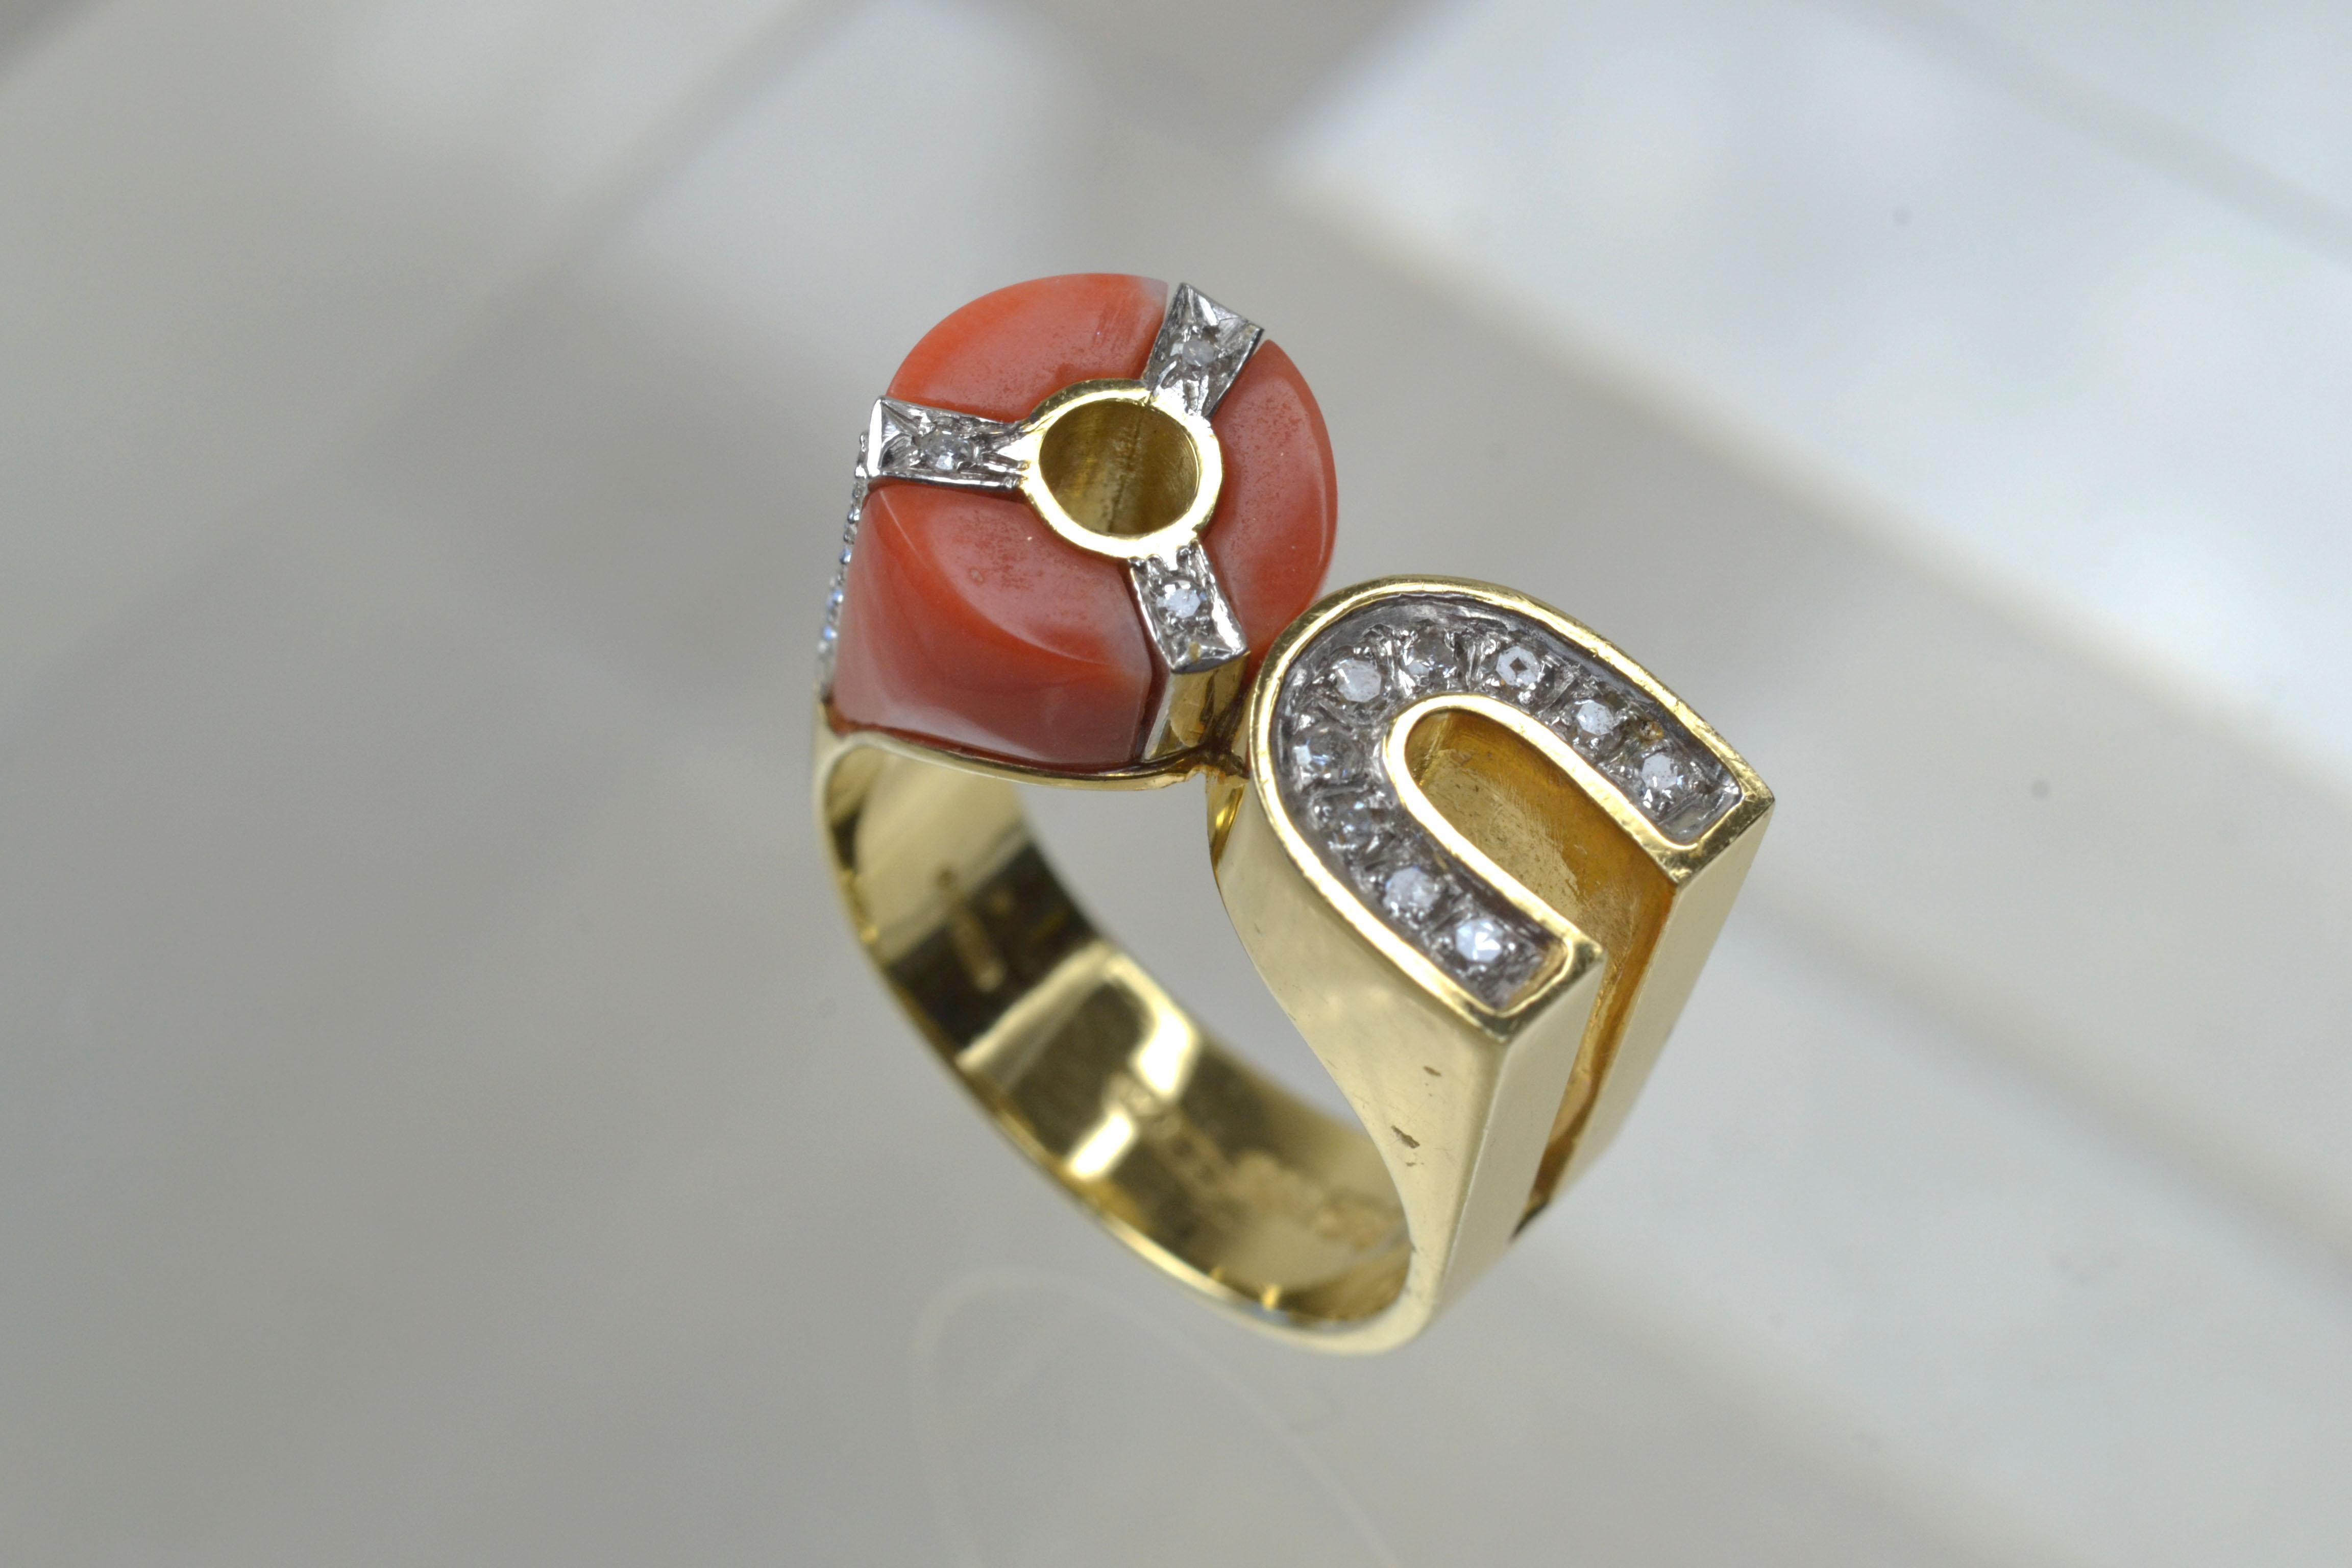 Vintage 14k Gold Coral and Diamond Shape Ring One-of-a-kind

This vintage coral and diamond ring from the 80s really is a one-of-a-kind design. It has a diamond encrusted horse-shoe shape on one side complimented by a striking coral circle also